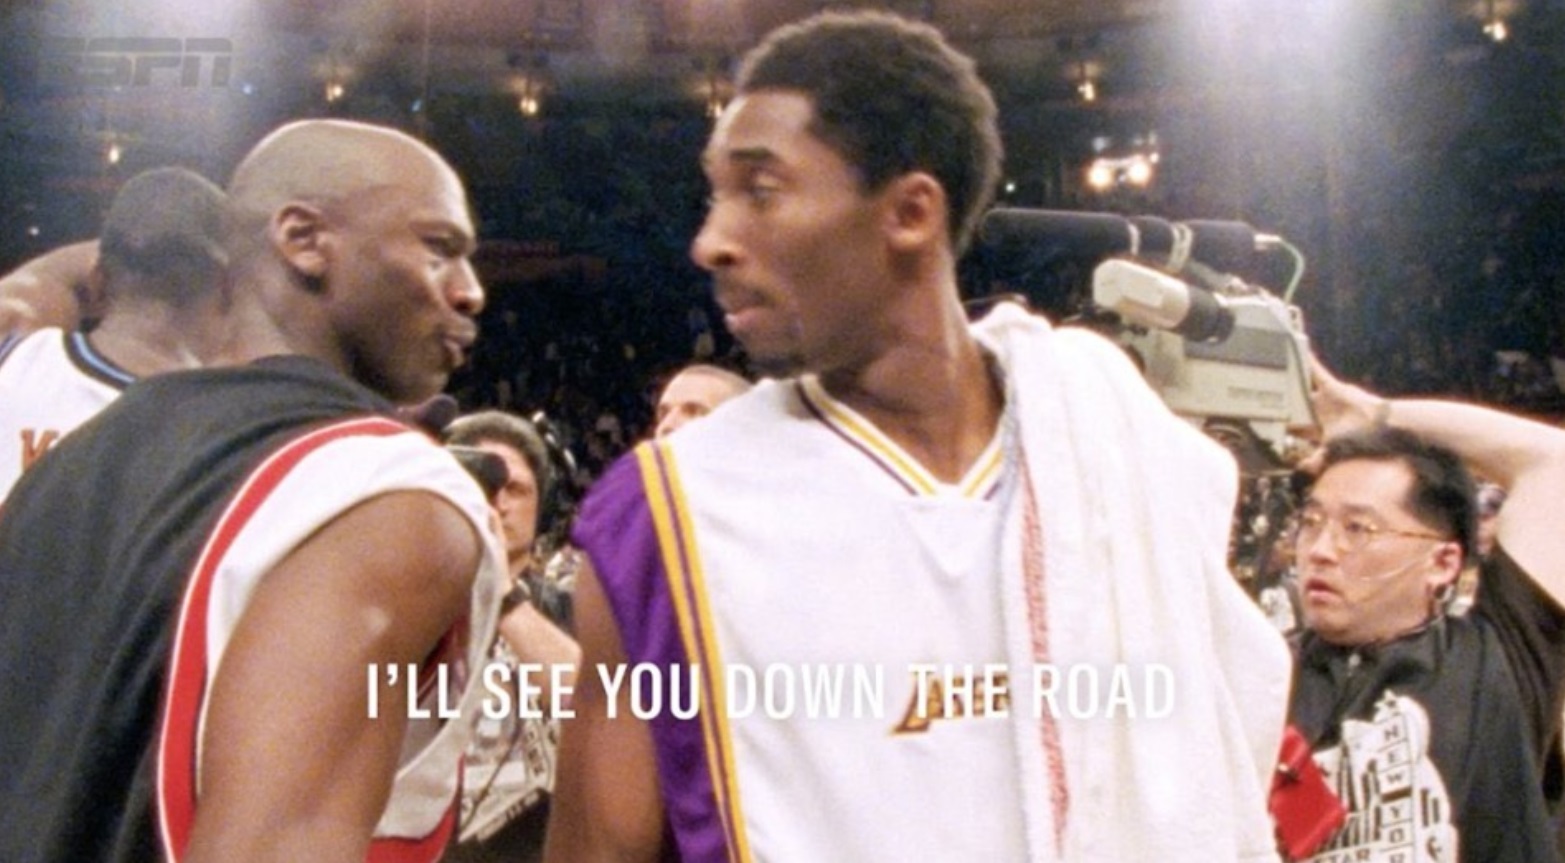 PHOTO Michael Jordan Telling Kobe He Will See Him Down The Road In Episode 5 Of The Last Dance